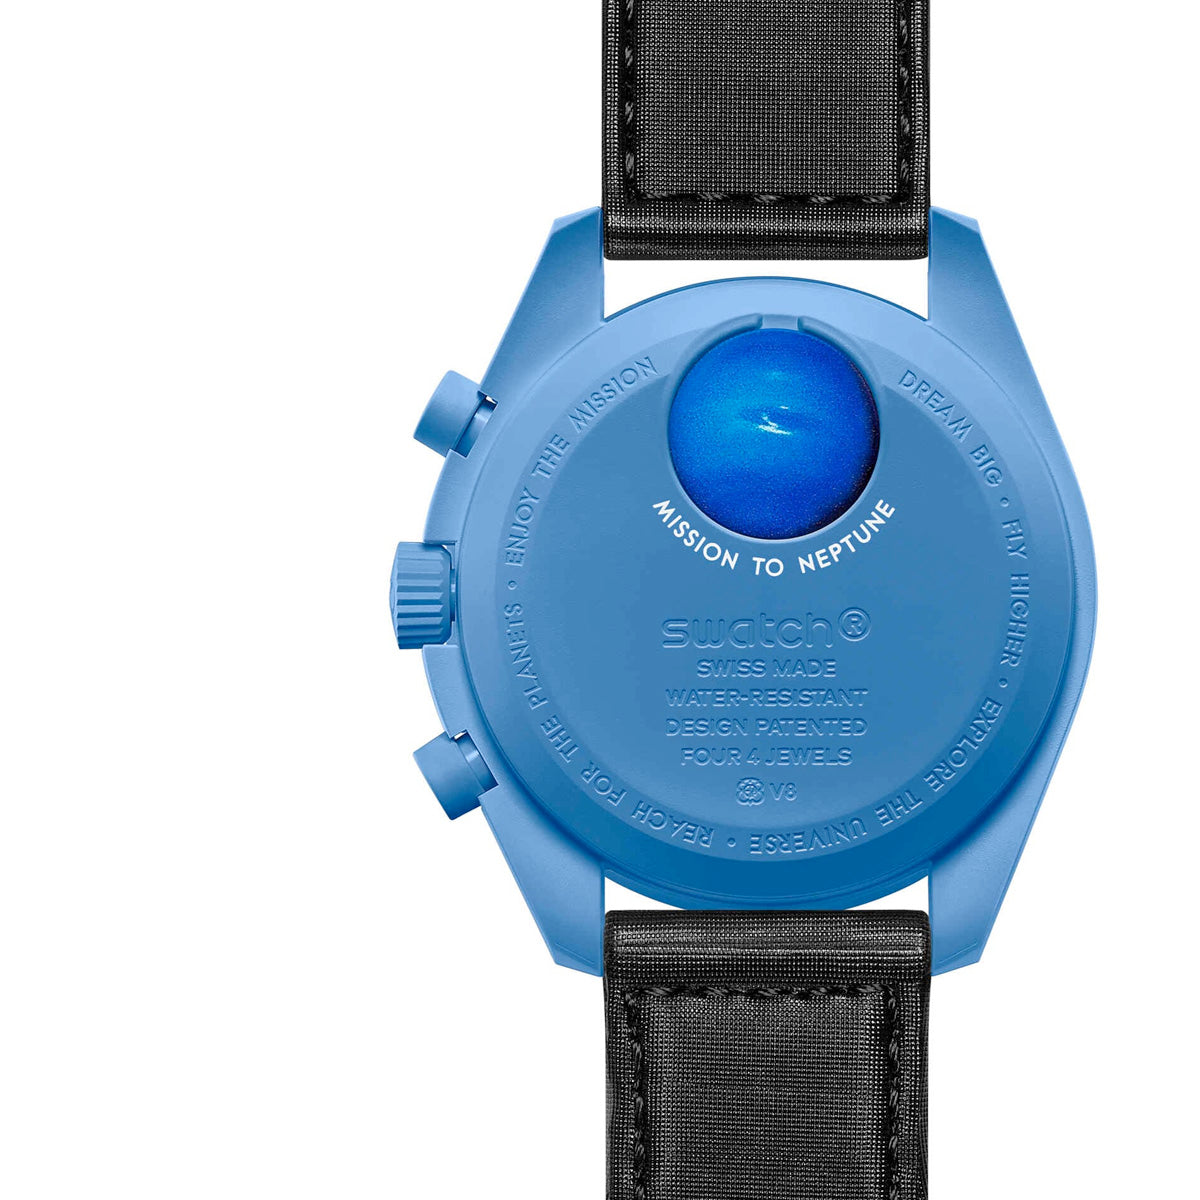 Swatch Omega mission to Neptun【新品・シール貼り】